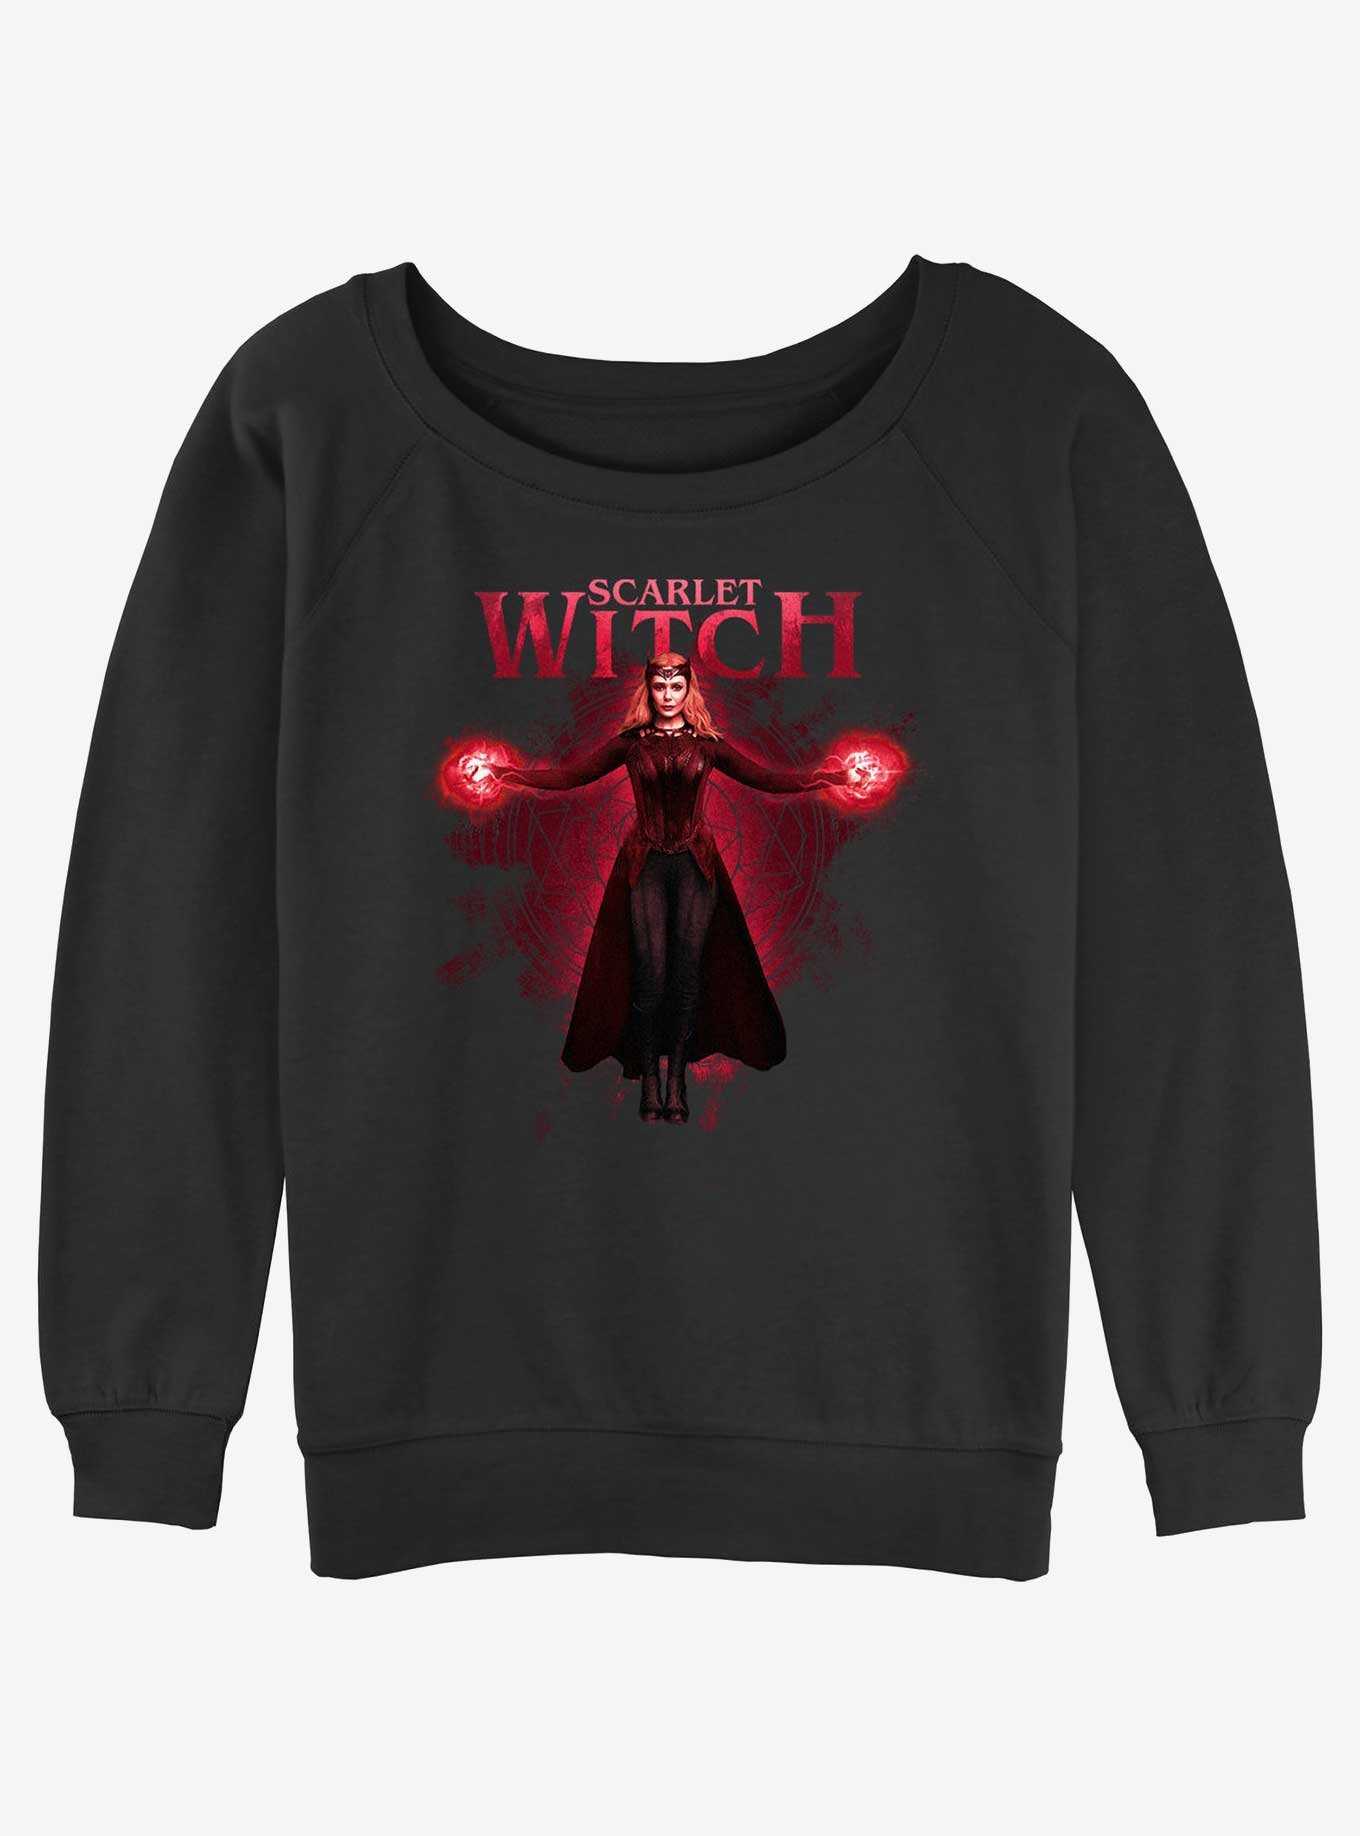 Marvel Doctor Strange in the Multiverse of Madness Scarlet Witch Rise Girls Slouchy Sweatshirt, , hi-res